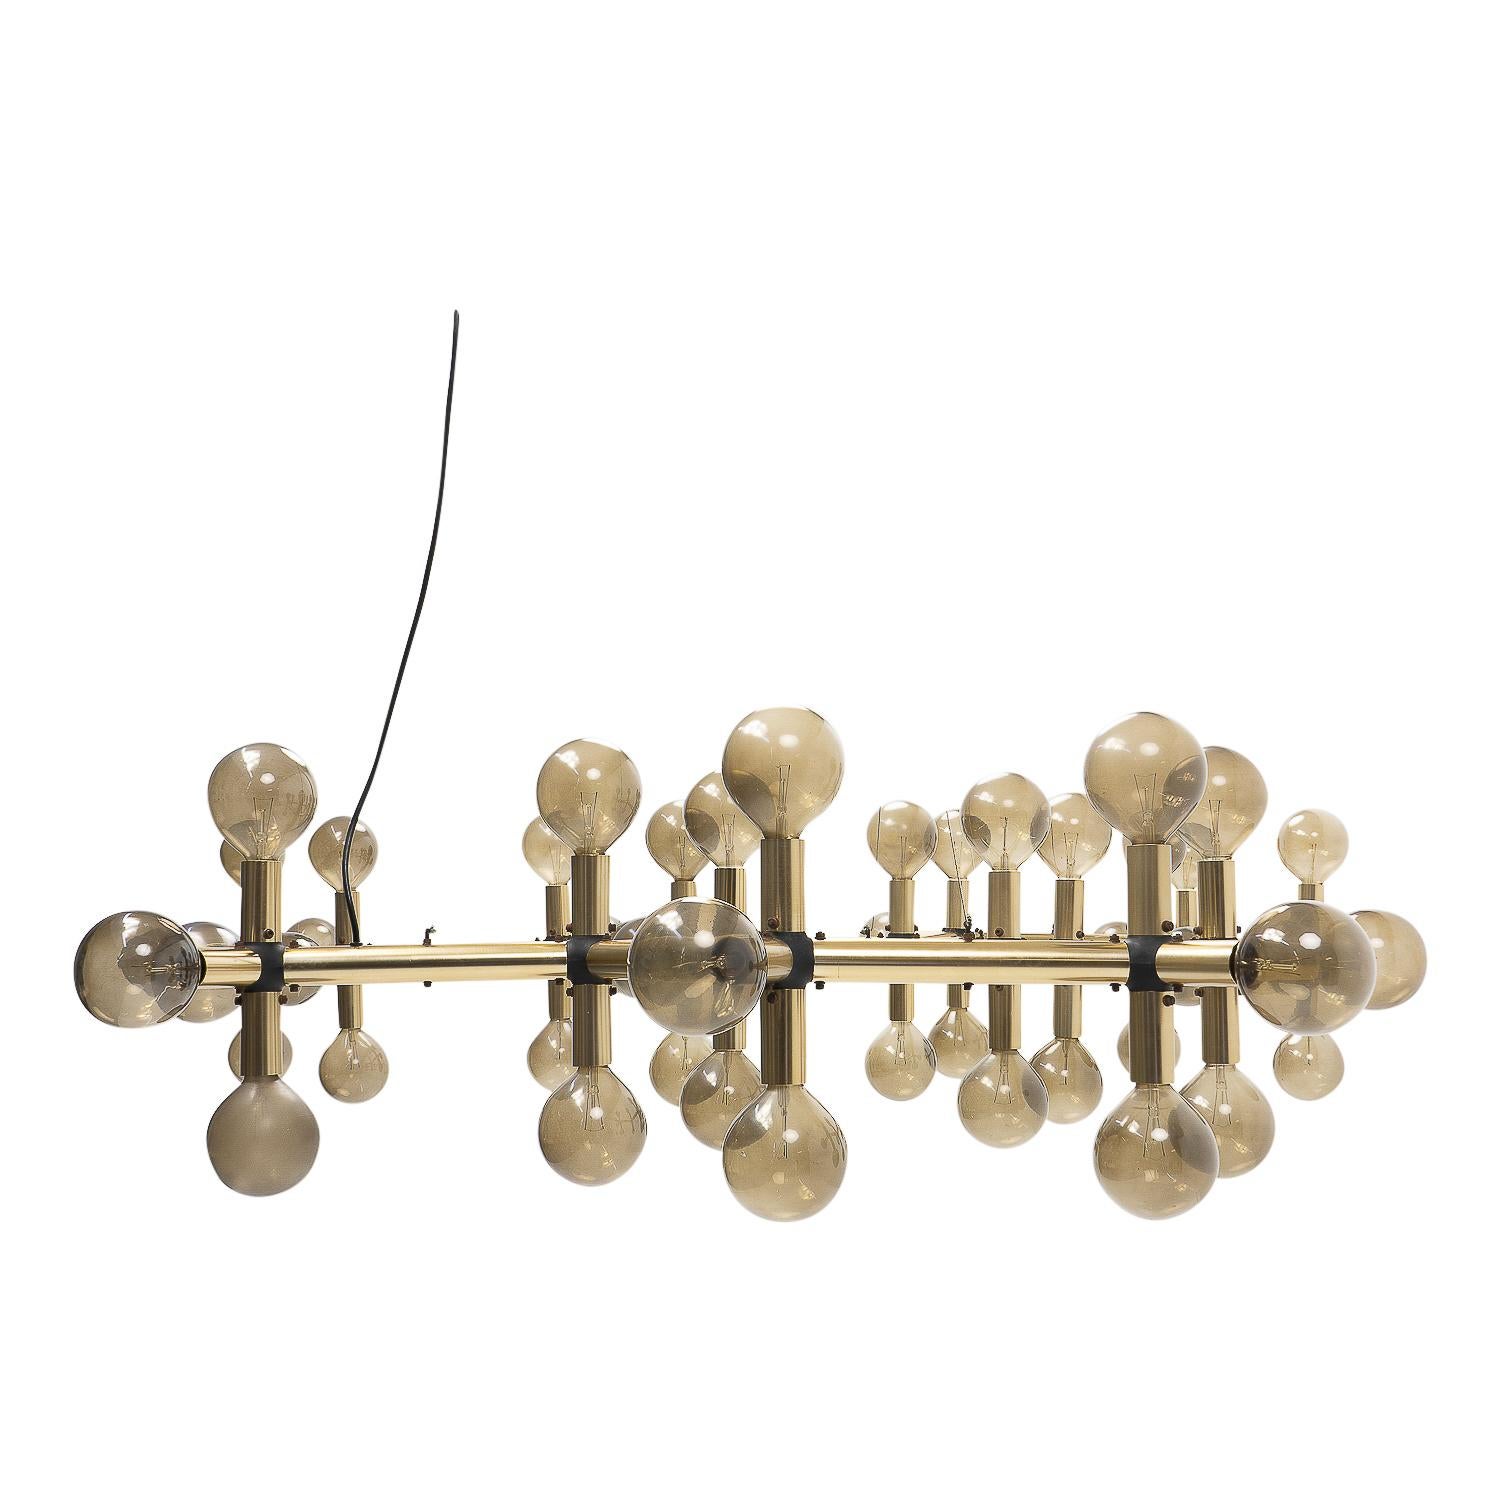 Swiss Design Classic Atomic Chandelier by Haussmann for Swisslamps Int, 1960s For Sale 1